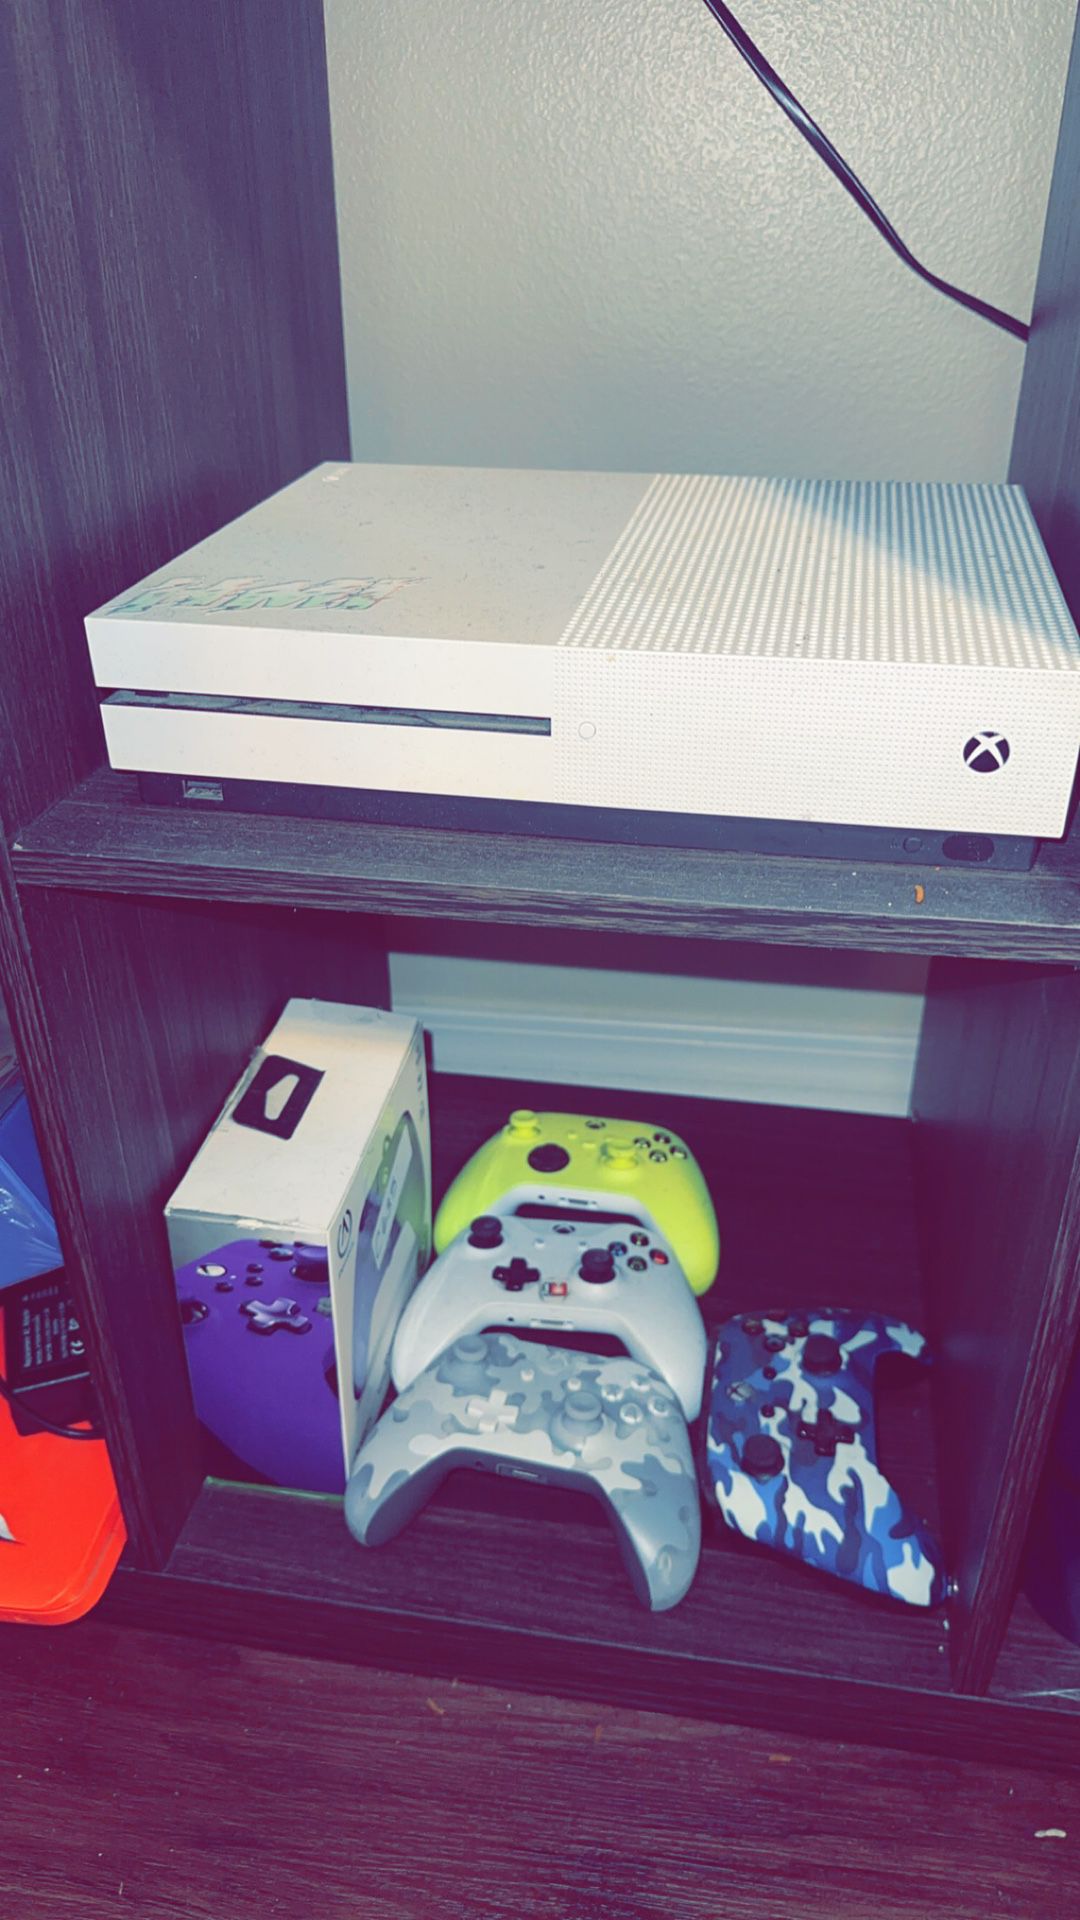 XBOX ONE W/ 5 CONTROLLERS AND A FEW GAMES